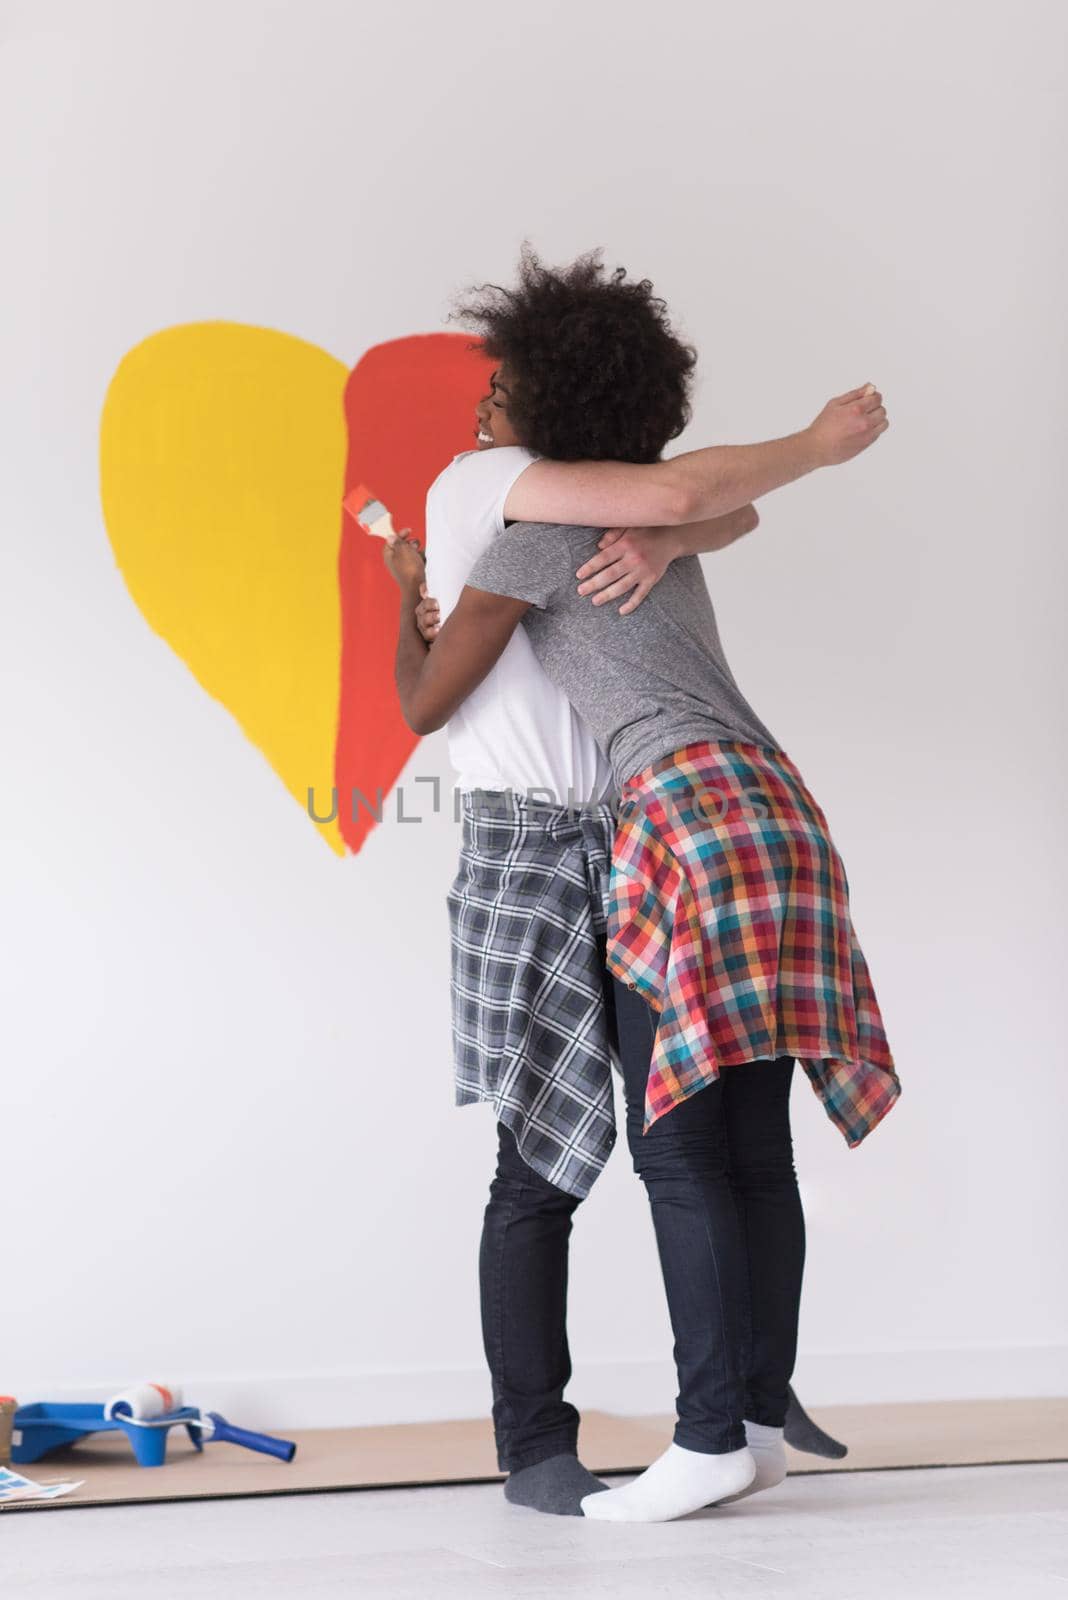 couple with painted heart on wall by dotshock